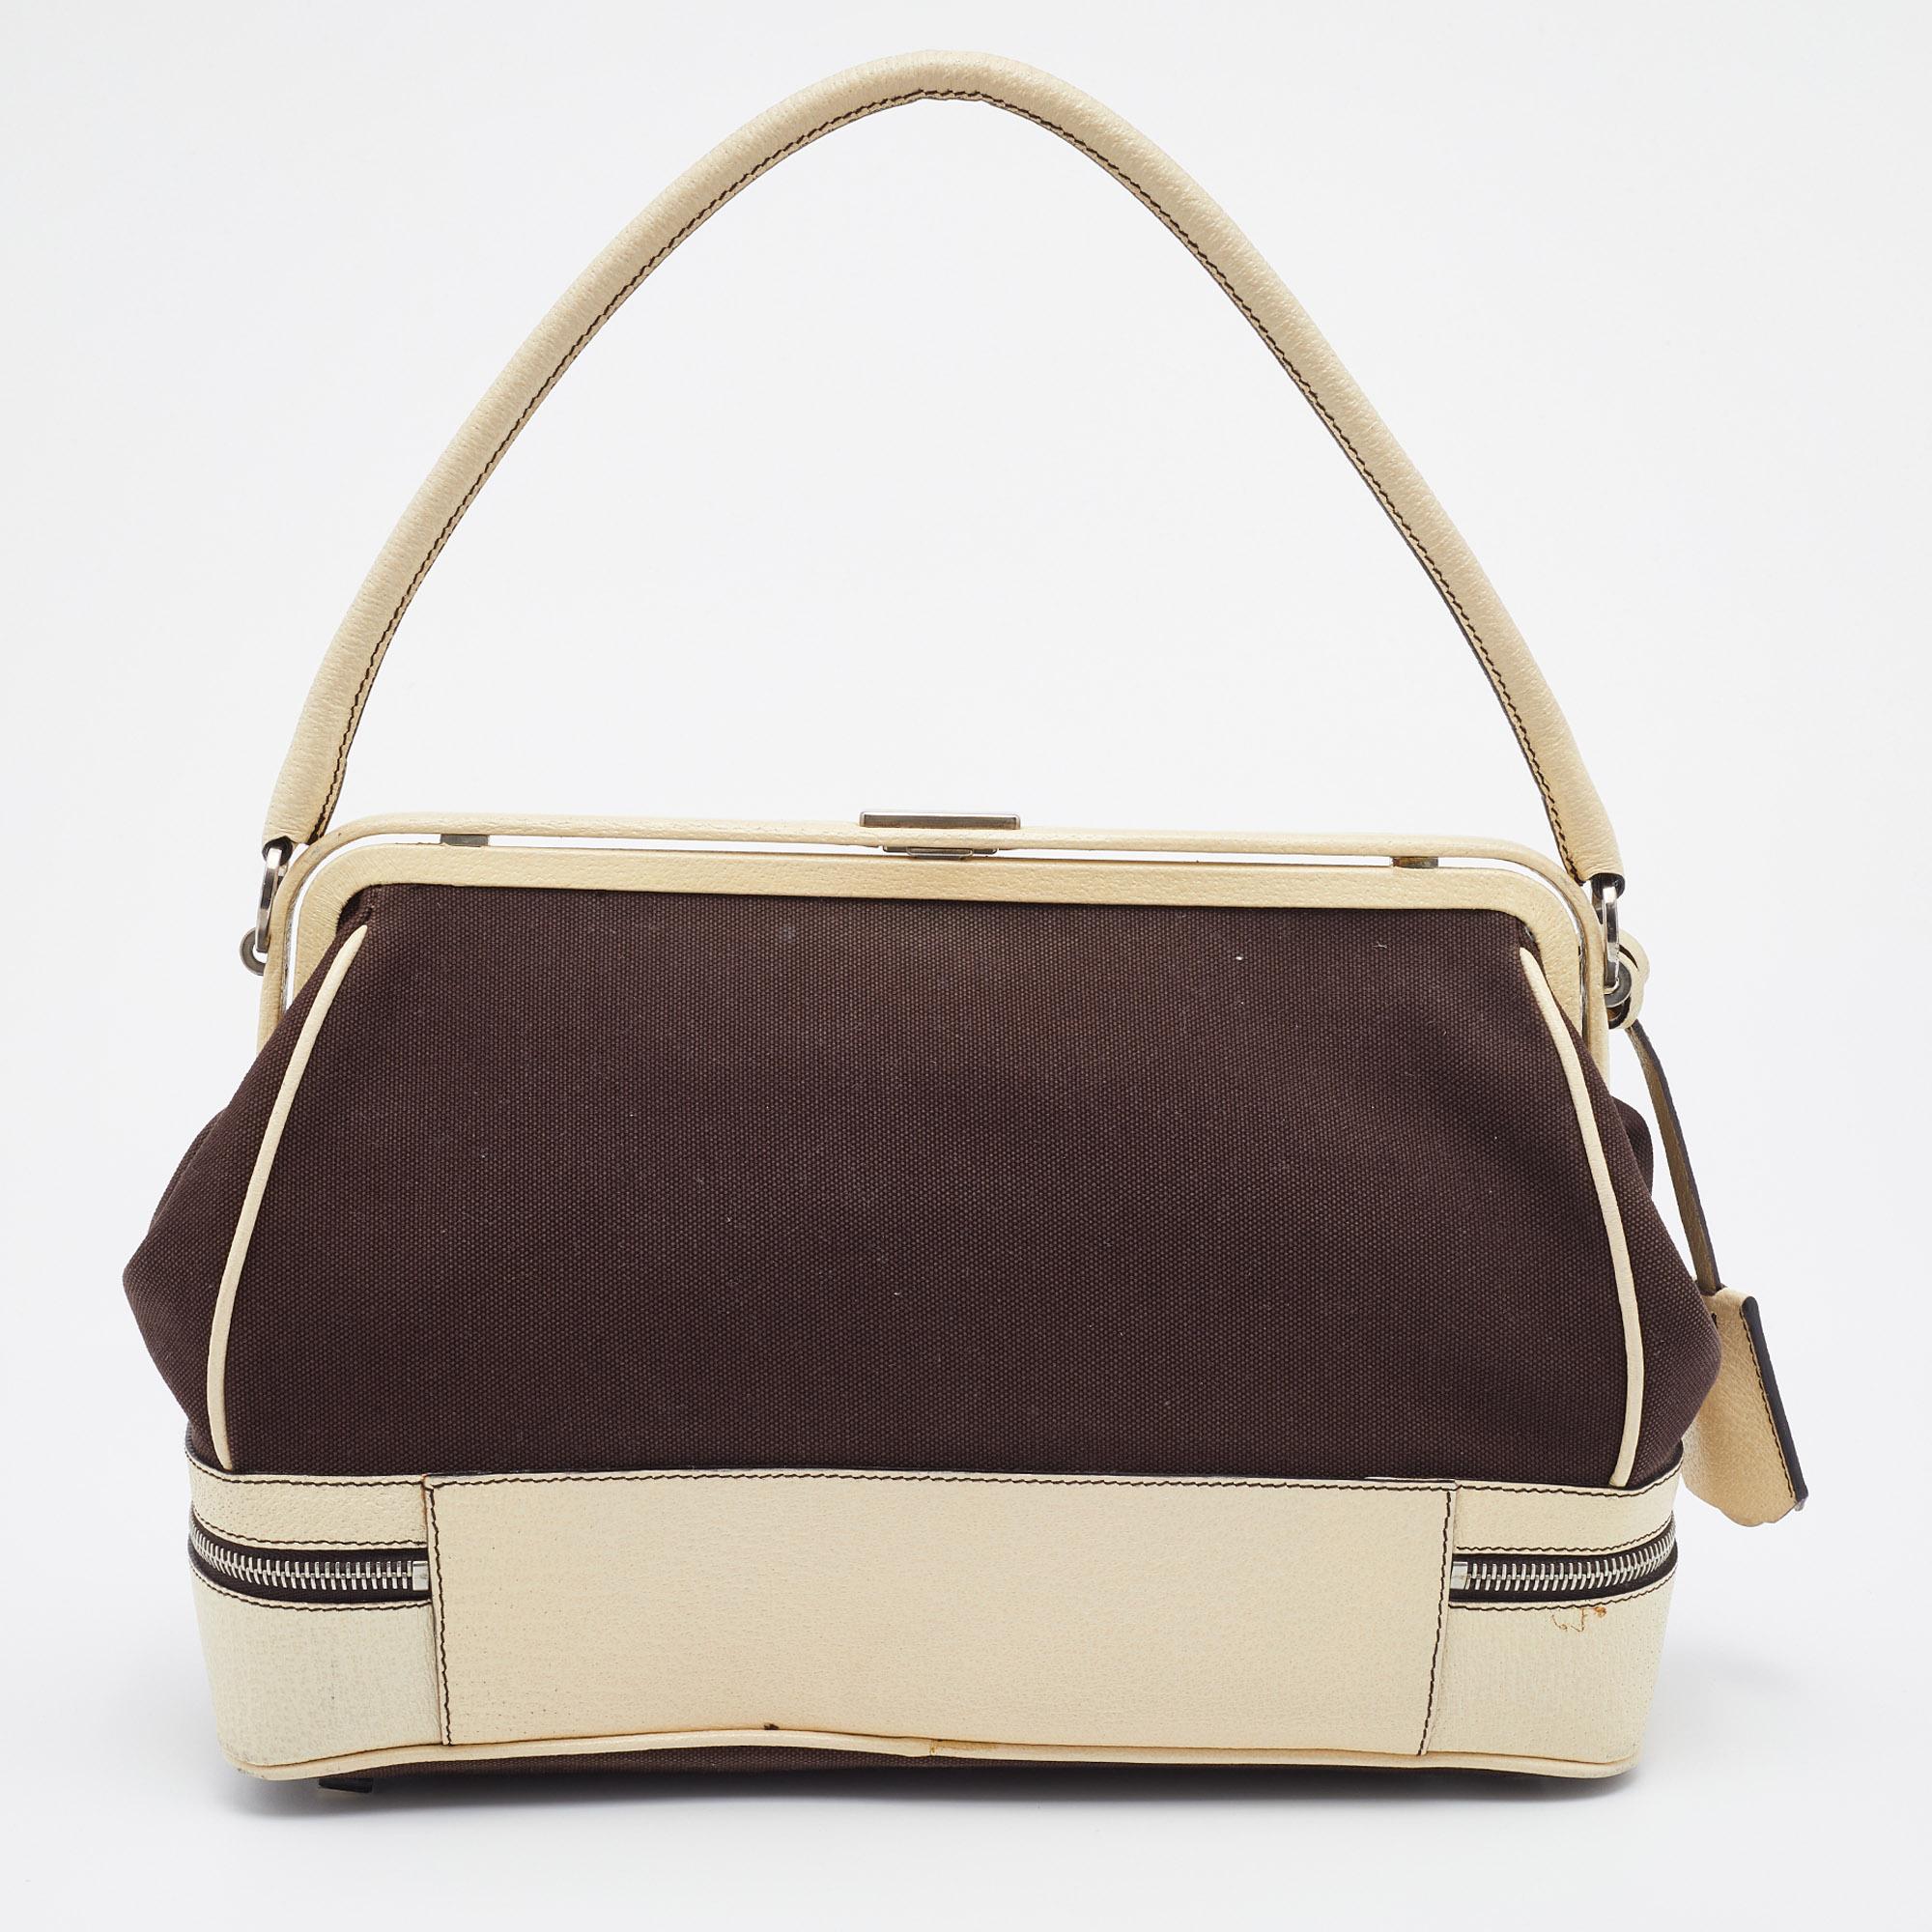 Giving handle bags an elegant update, this Doctor's bag by Prada will be a valuable addition to your closet. It has been crafted from the canvas as well as leather and styled with a zippered base. It comes with a top handle and a perfectly sized